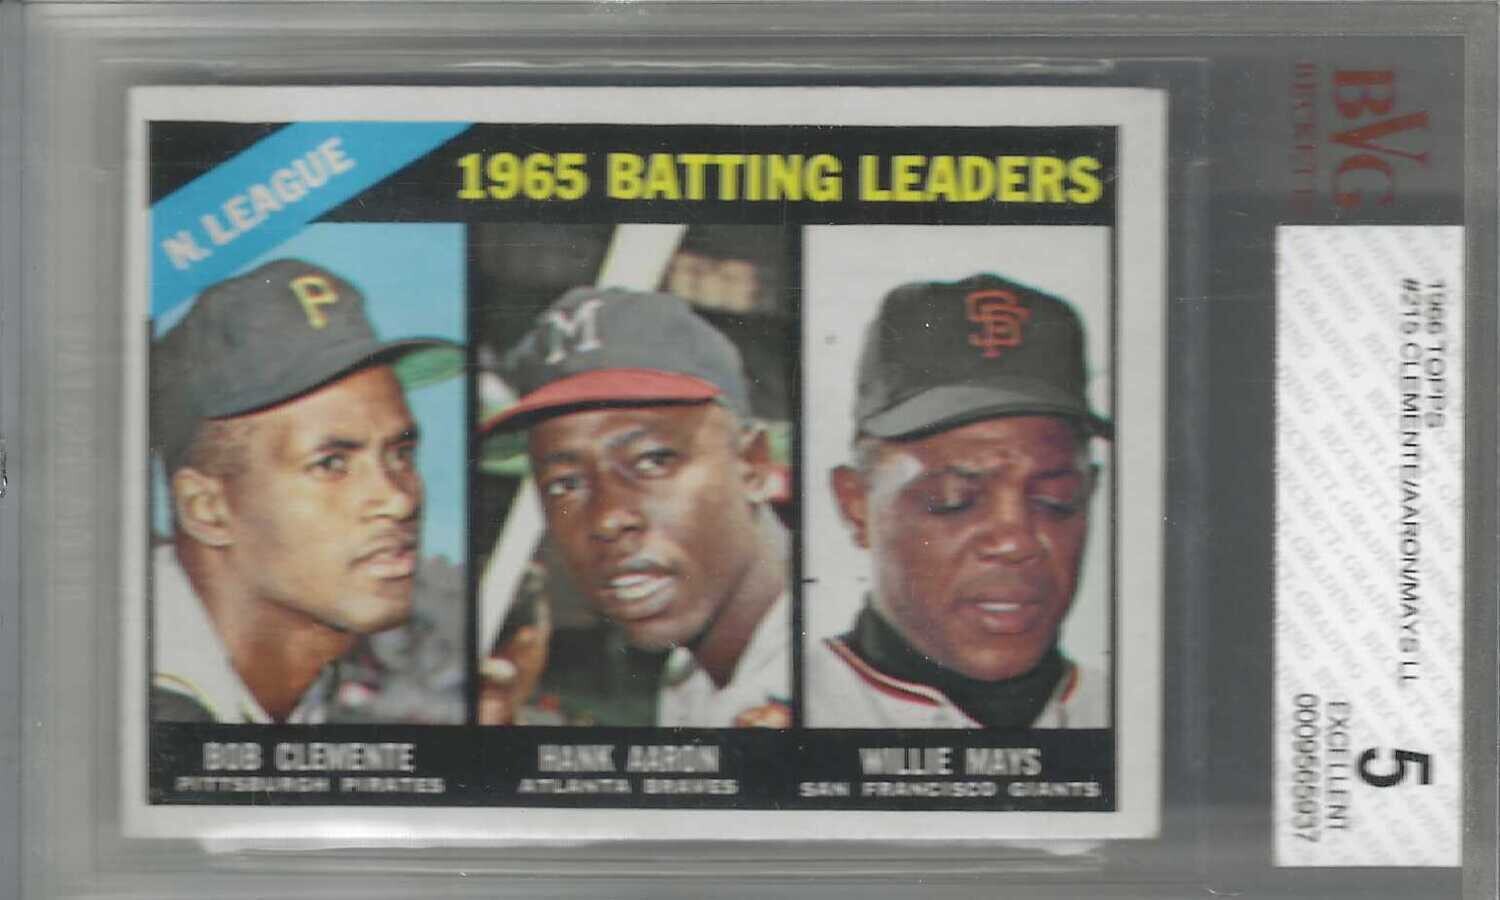 1966 Topps #215 NL Batting Leaders Clemente/ Aaron/ Mays Beckett graded 5